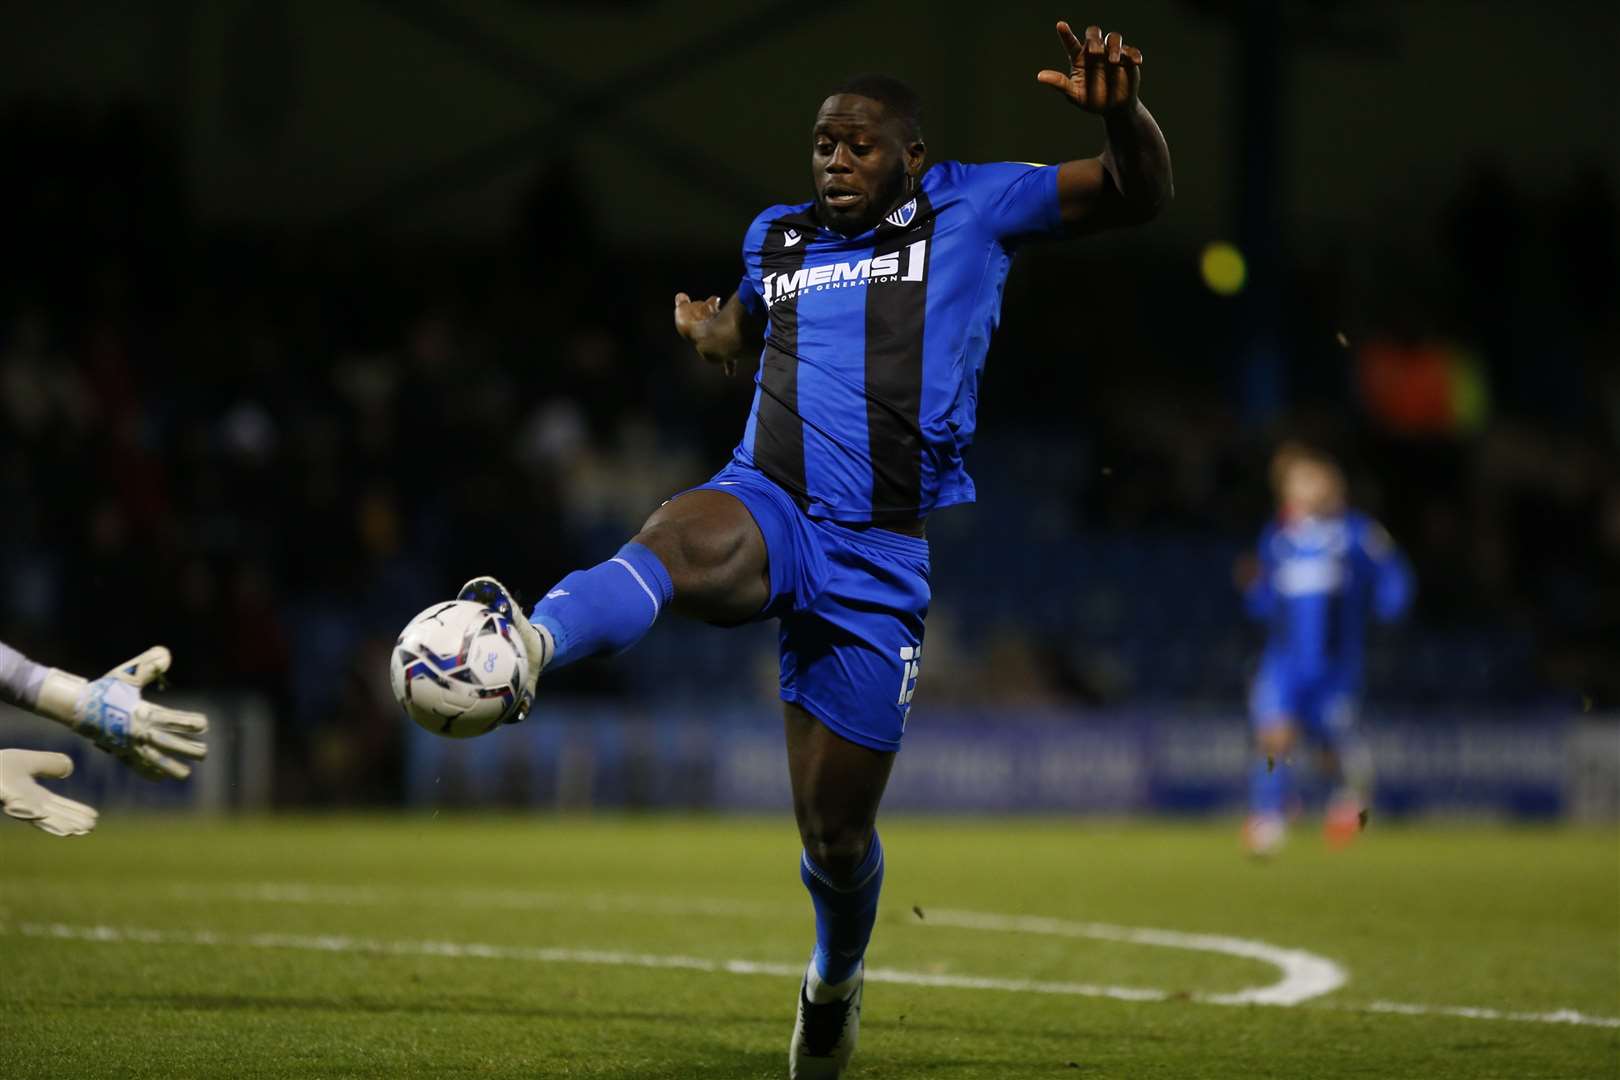 John Akinde is about to be cleaned out by the Portsmouth keeper Picture: Andy Jones